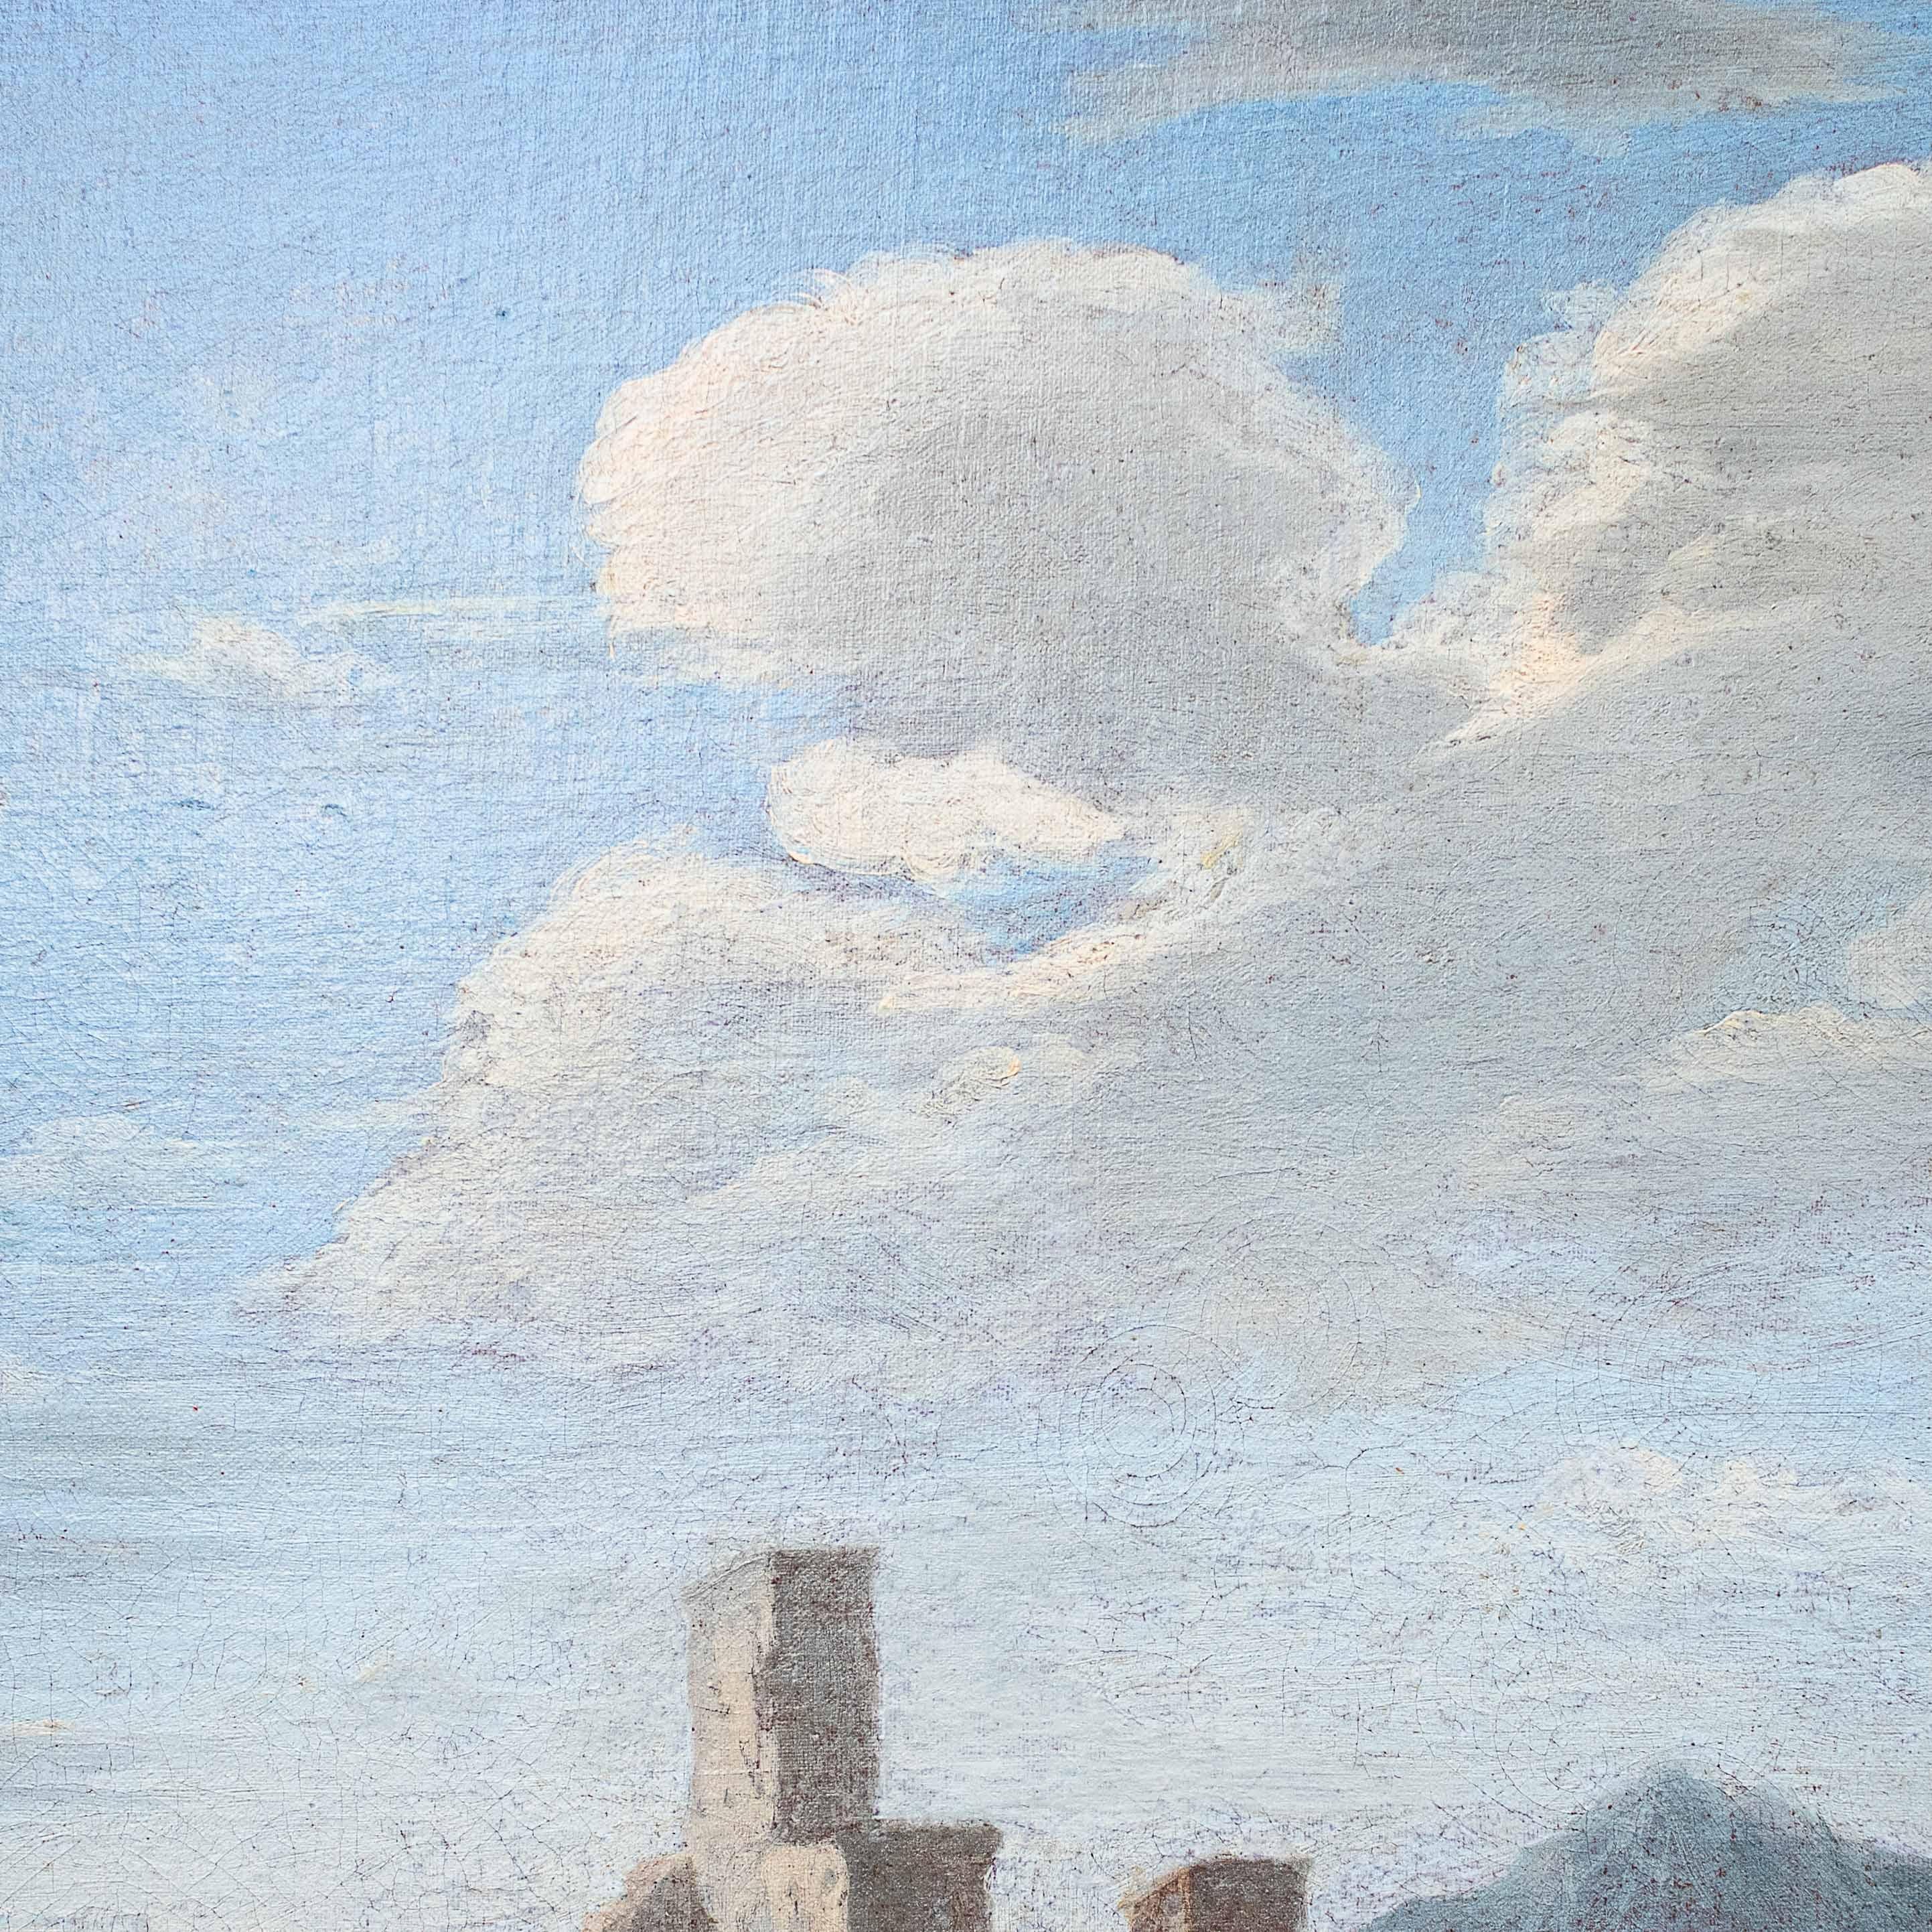 Domenico Roberti '1642-1707' Whims with Classical Ruins Paintings Oil on Canvas  14